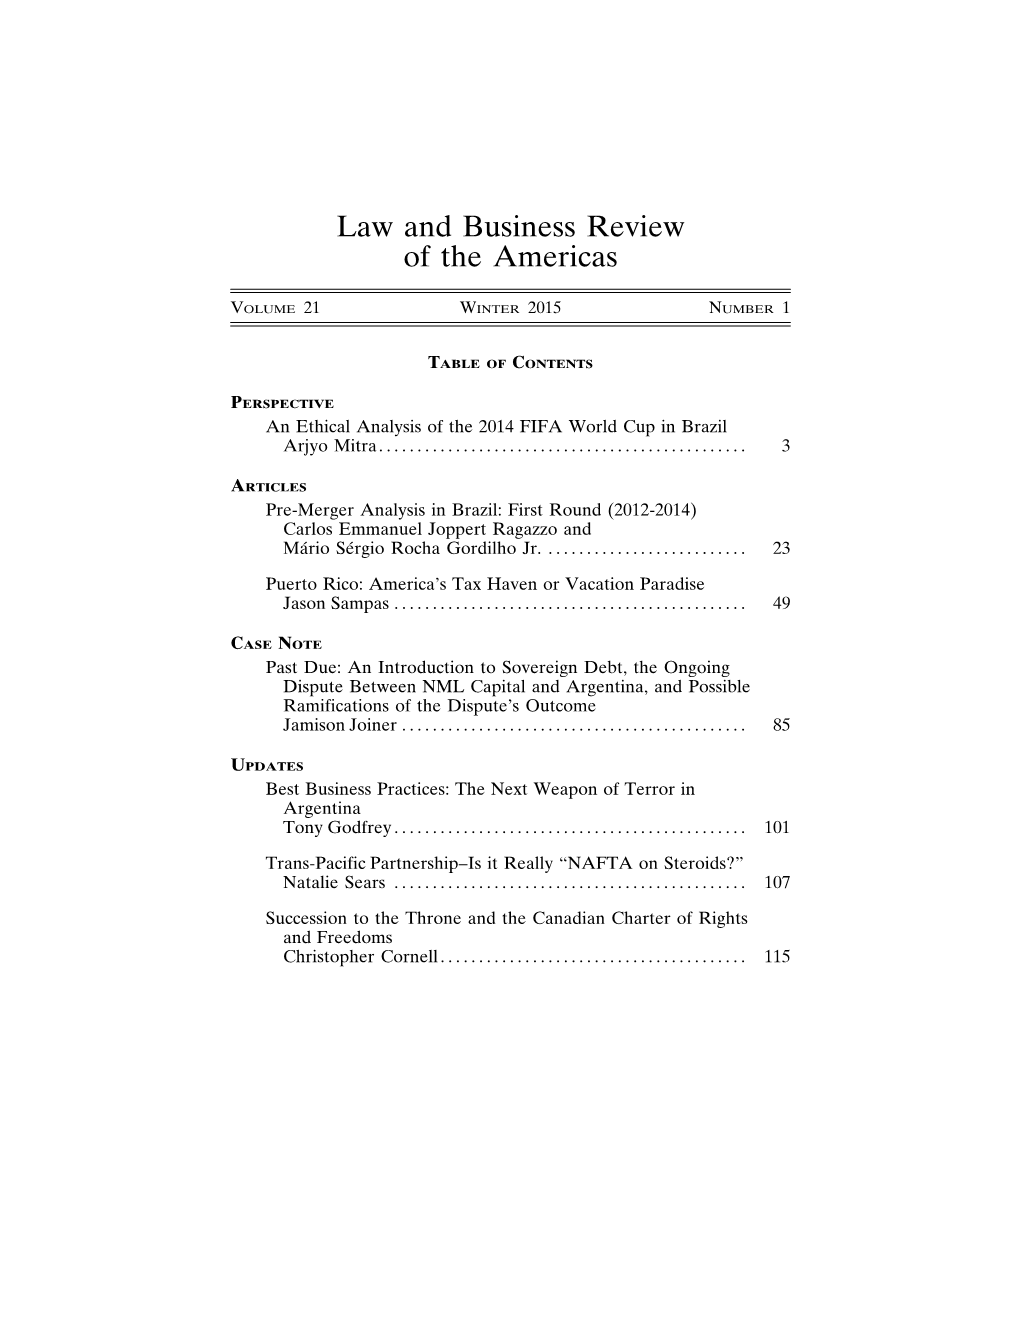 Law and Business Review of the Americas